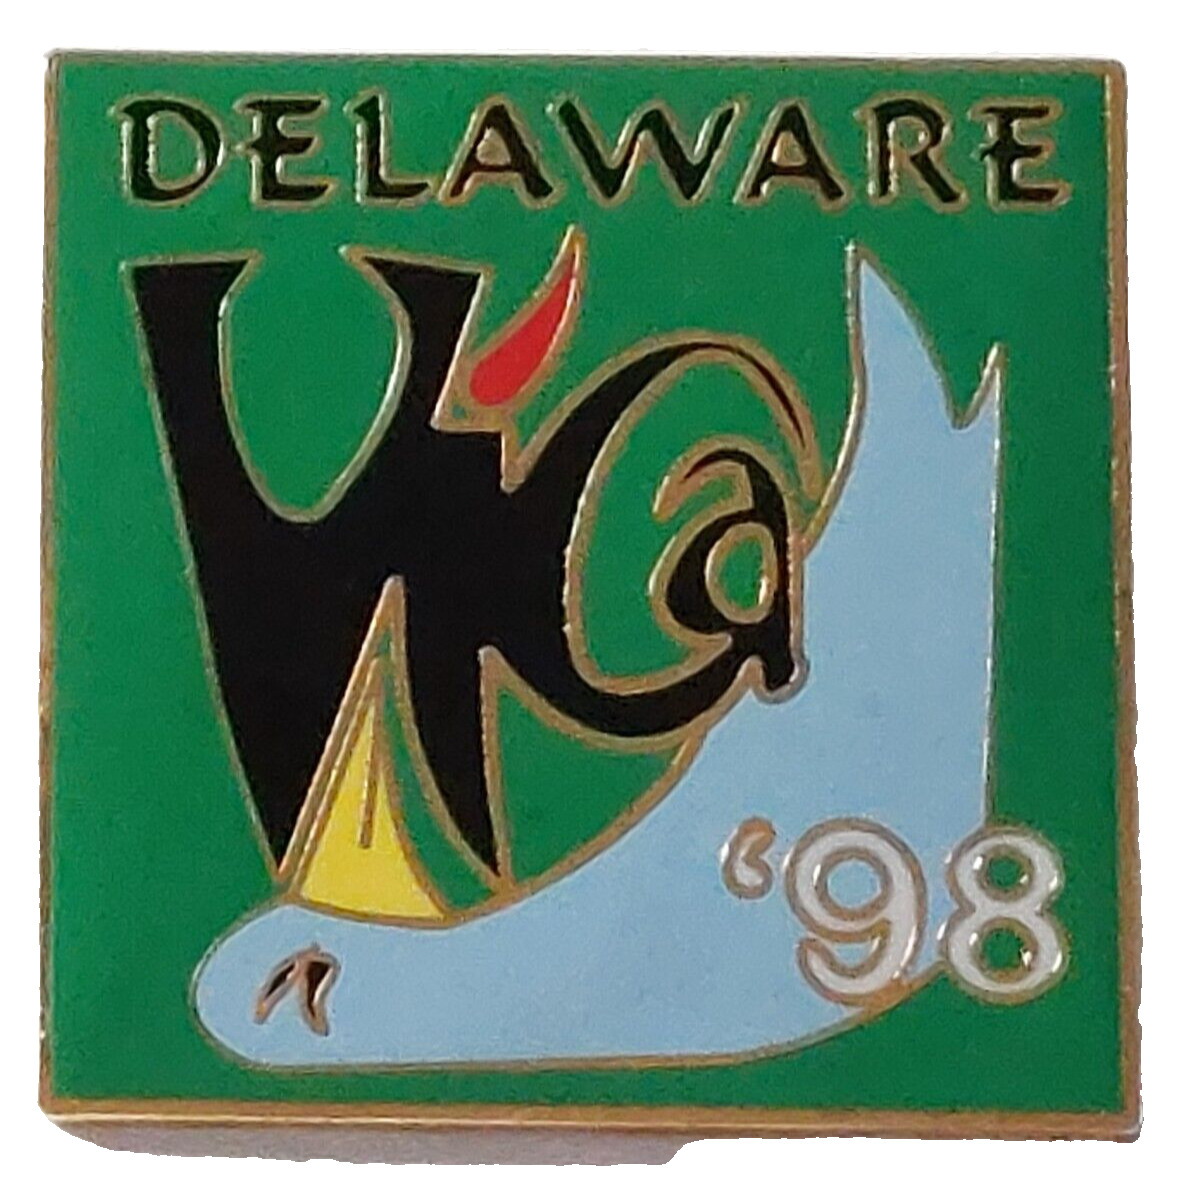 VICA (Vocational Industrial Clubs of America) 1998 Delaware Lapel Pin